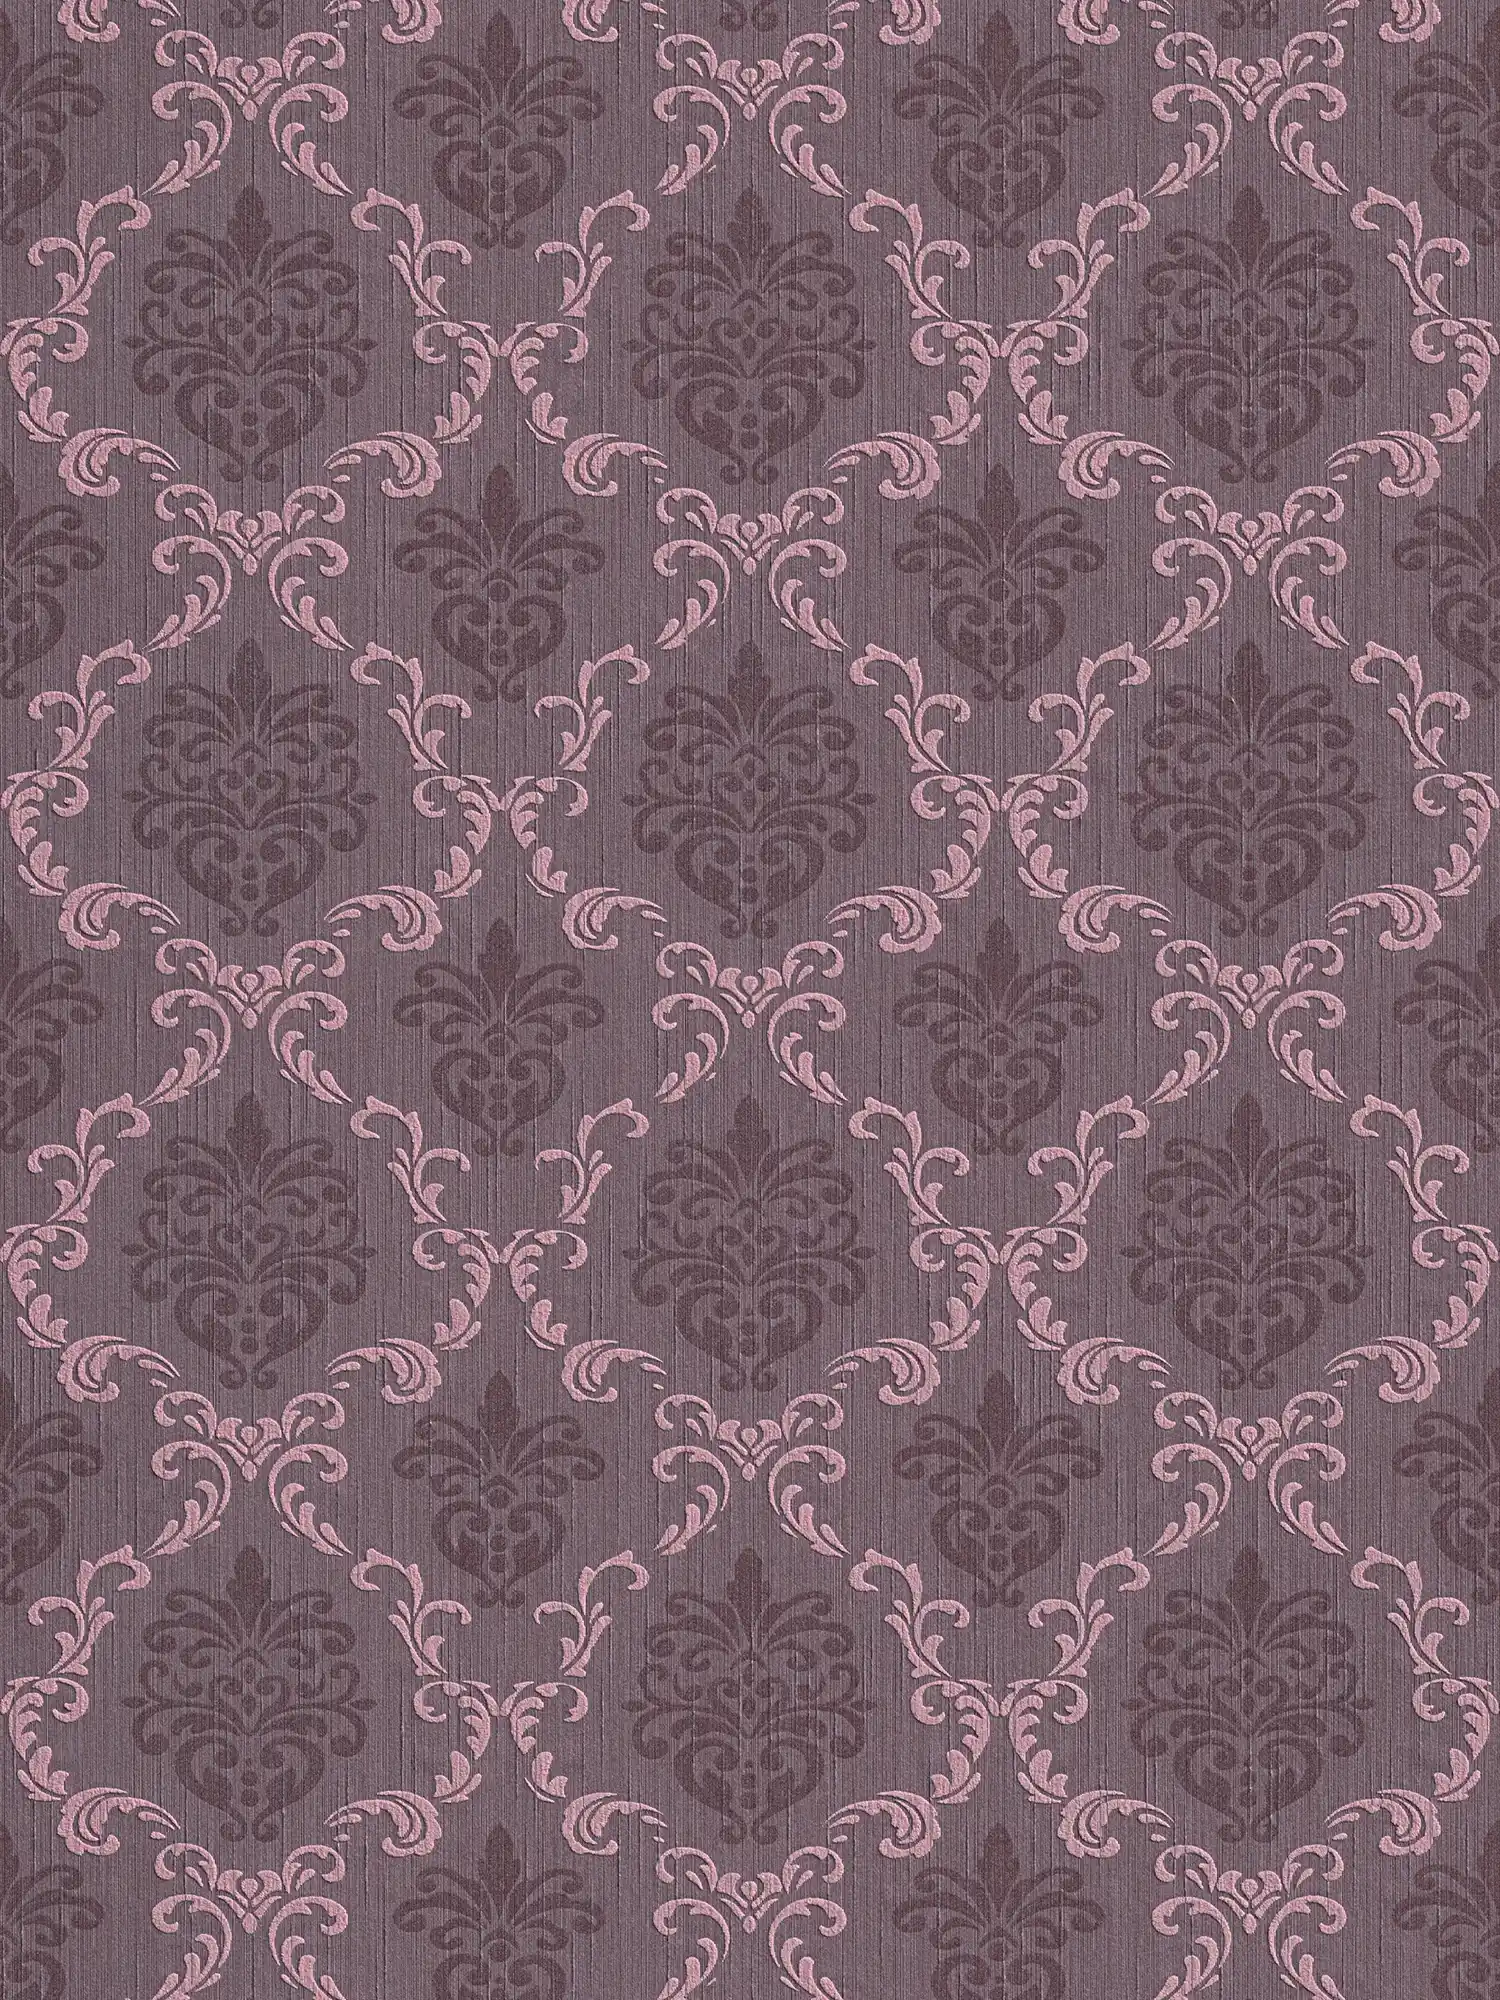         Baroque wallpaper with ornaments & textured pattern - purple
    